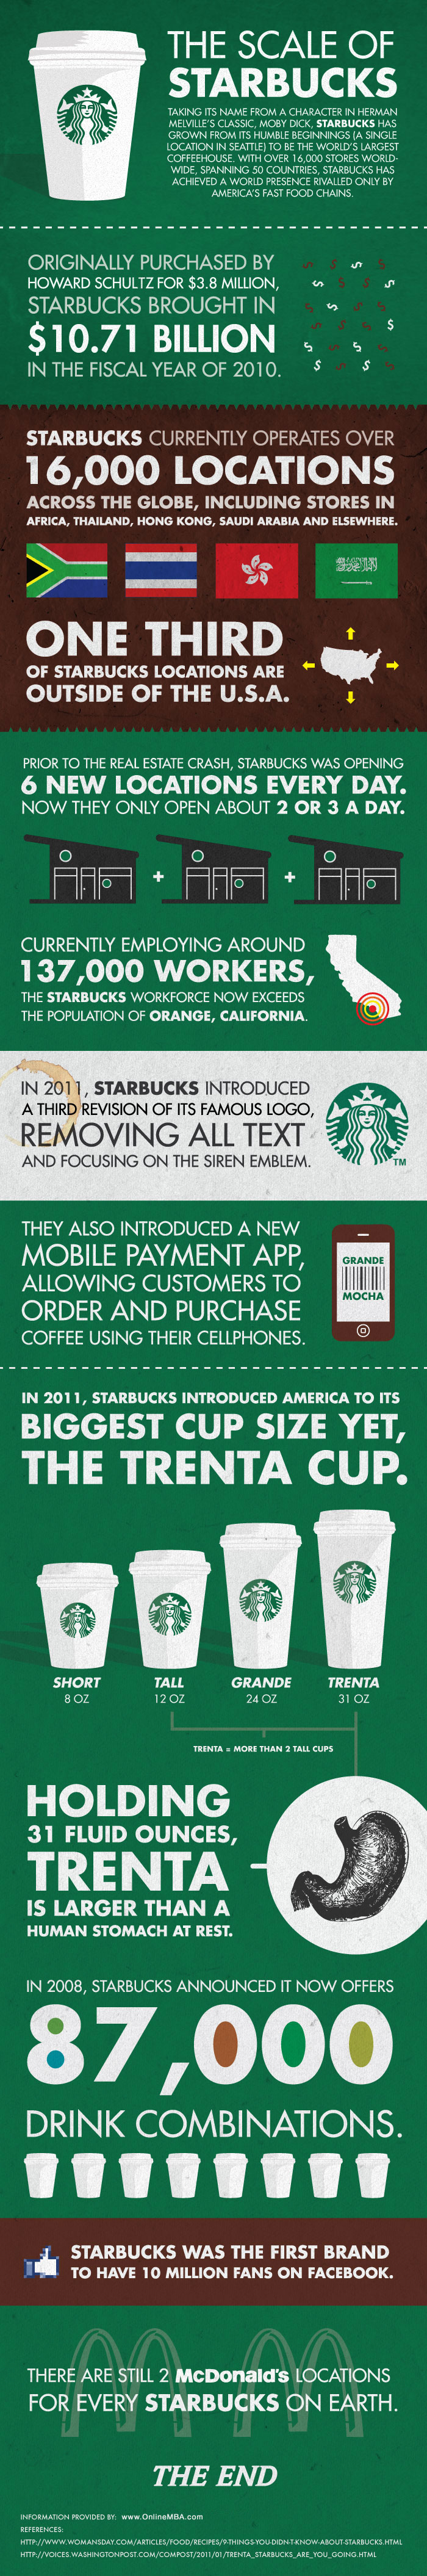 The Scale of Starbucks